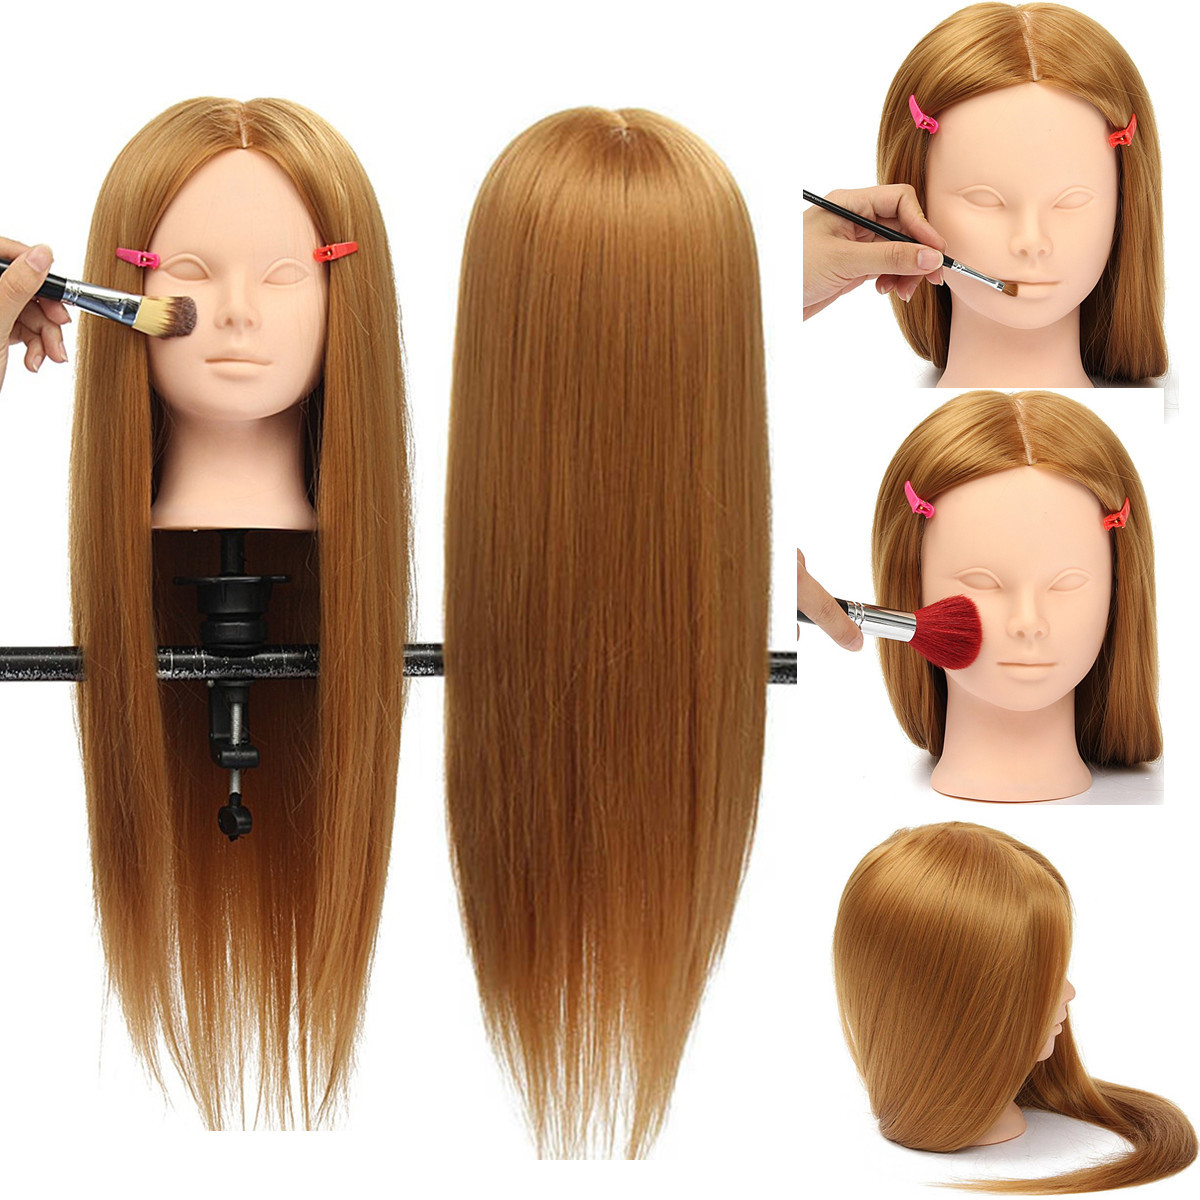 

26" Long Hair Training Mannequin Head Model Hairdressing Makeup Practice with Clamp Holder